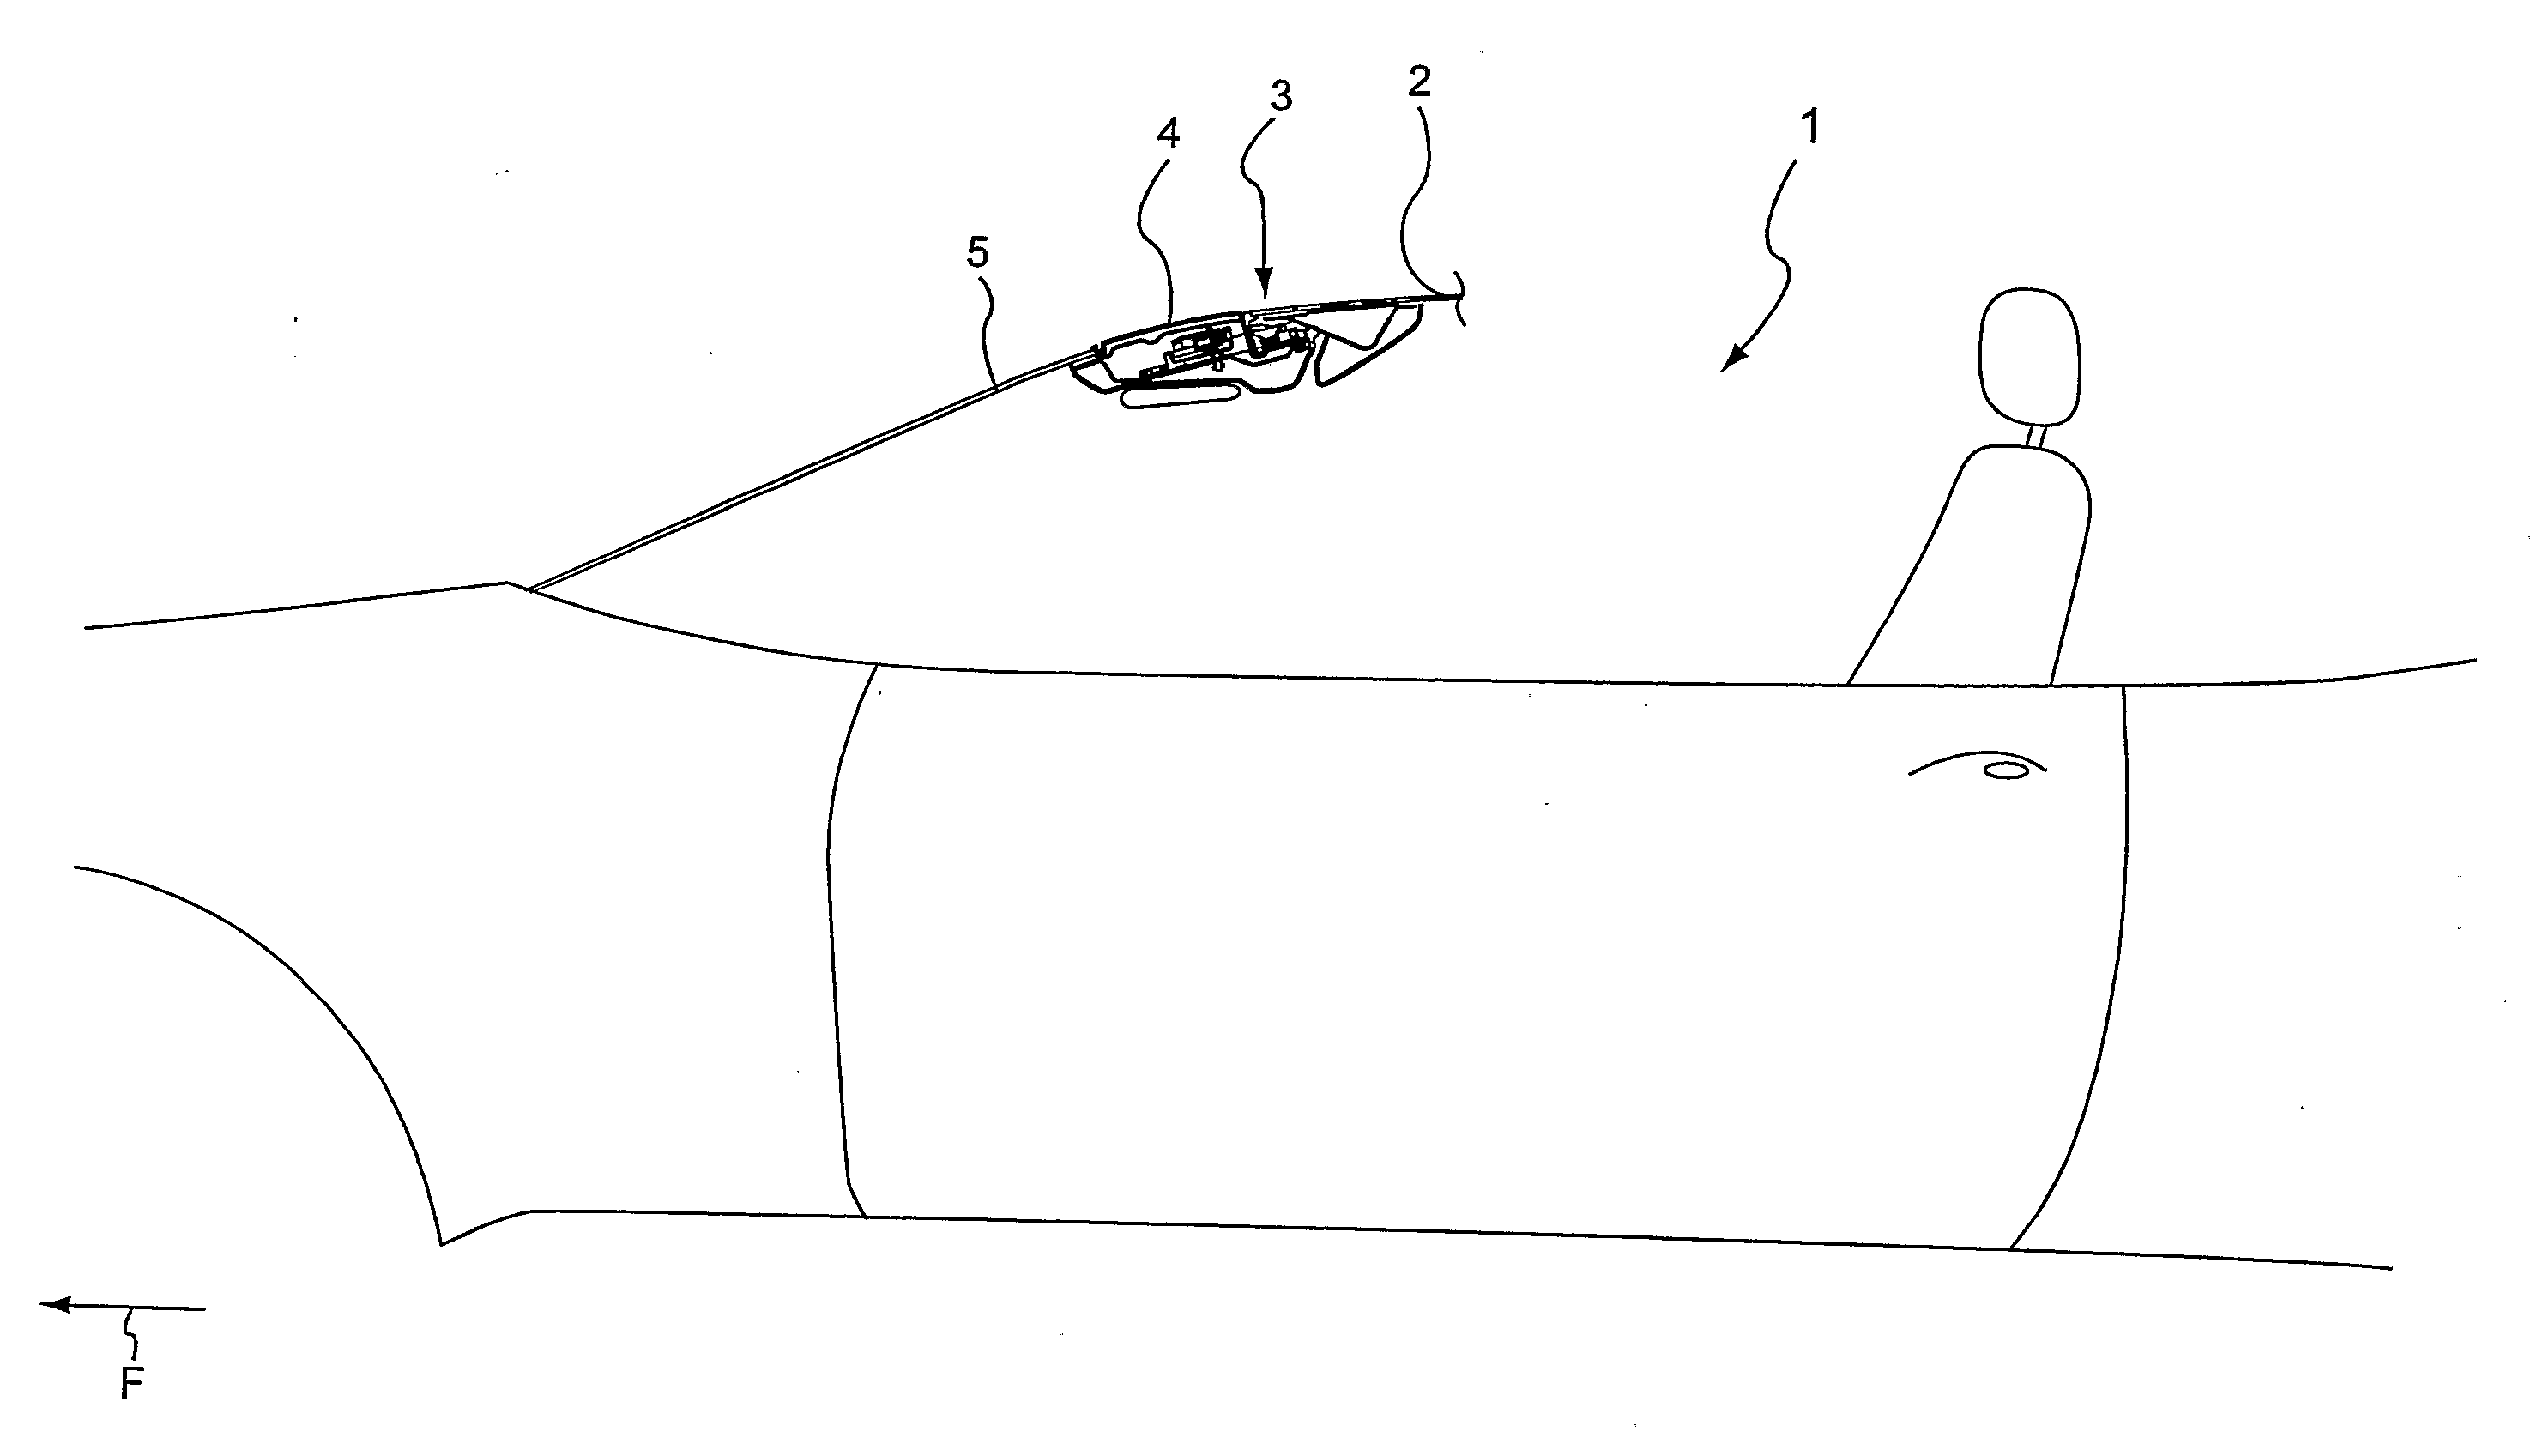 Convertible Roof that Latches to an Upper Transverse Frame Part of the Windshield Frame